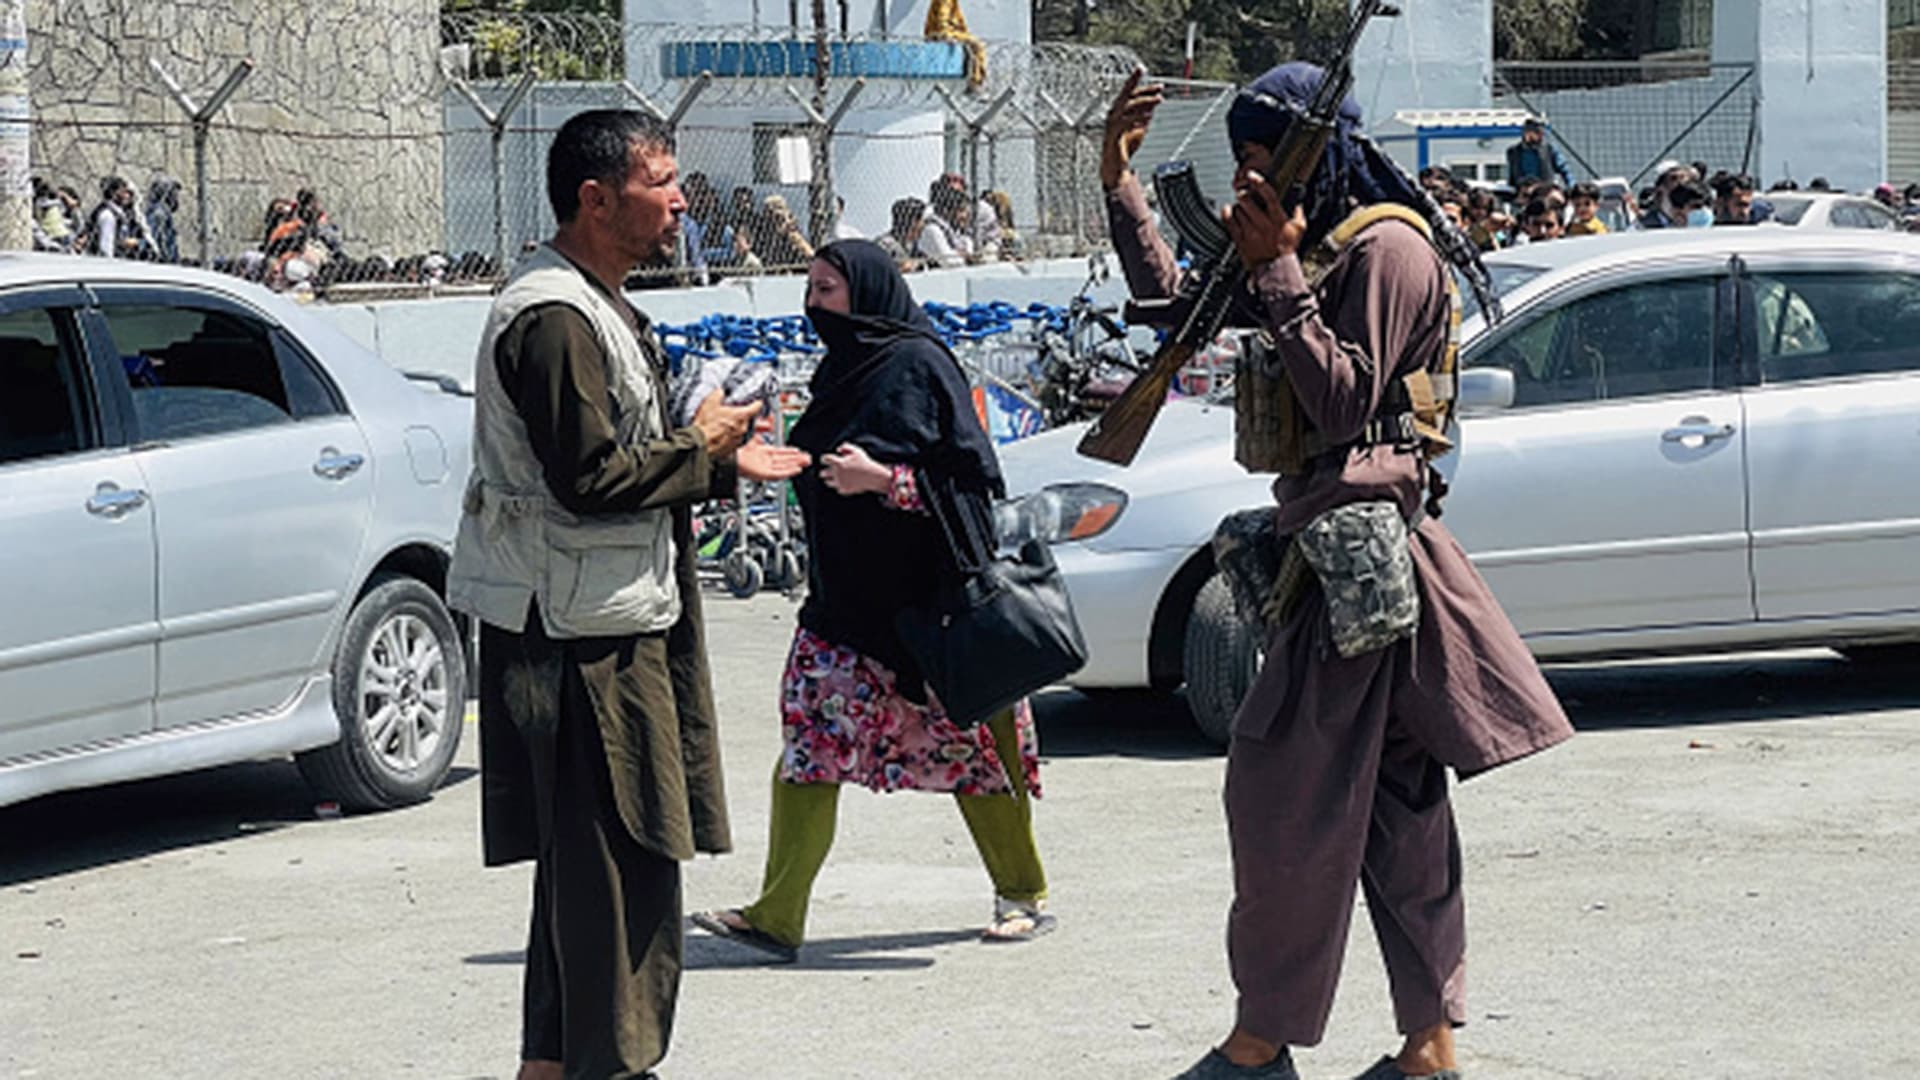 Taliban members stand near Kabul airport as Afghans rush to flee